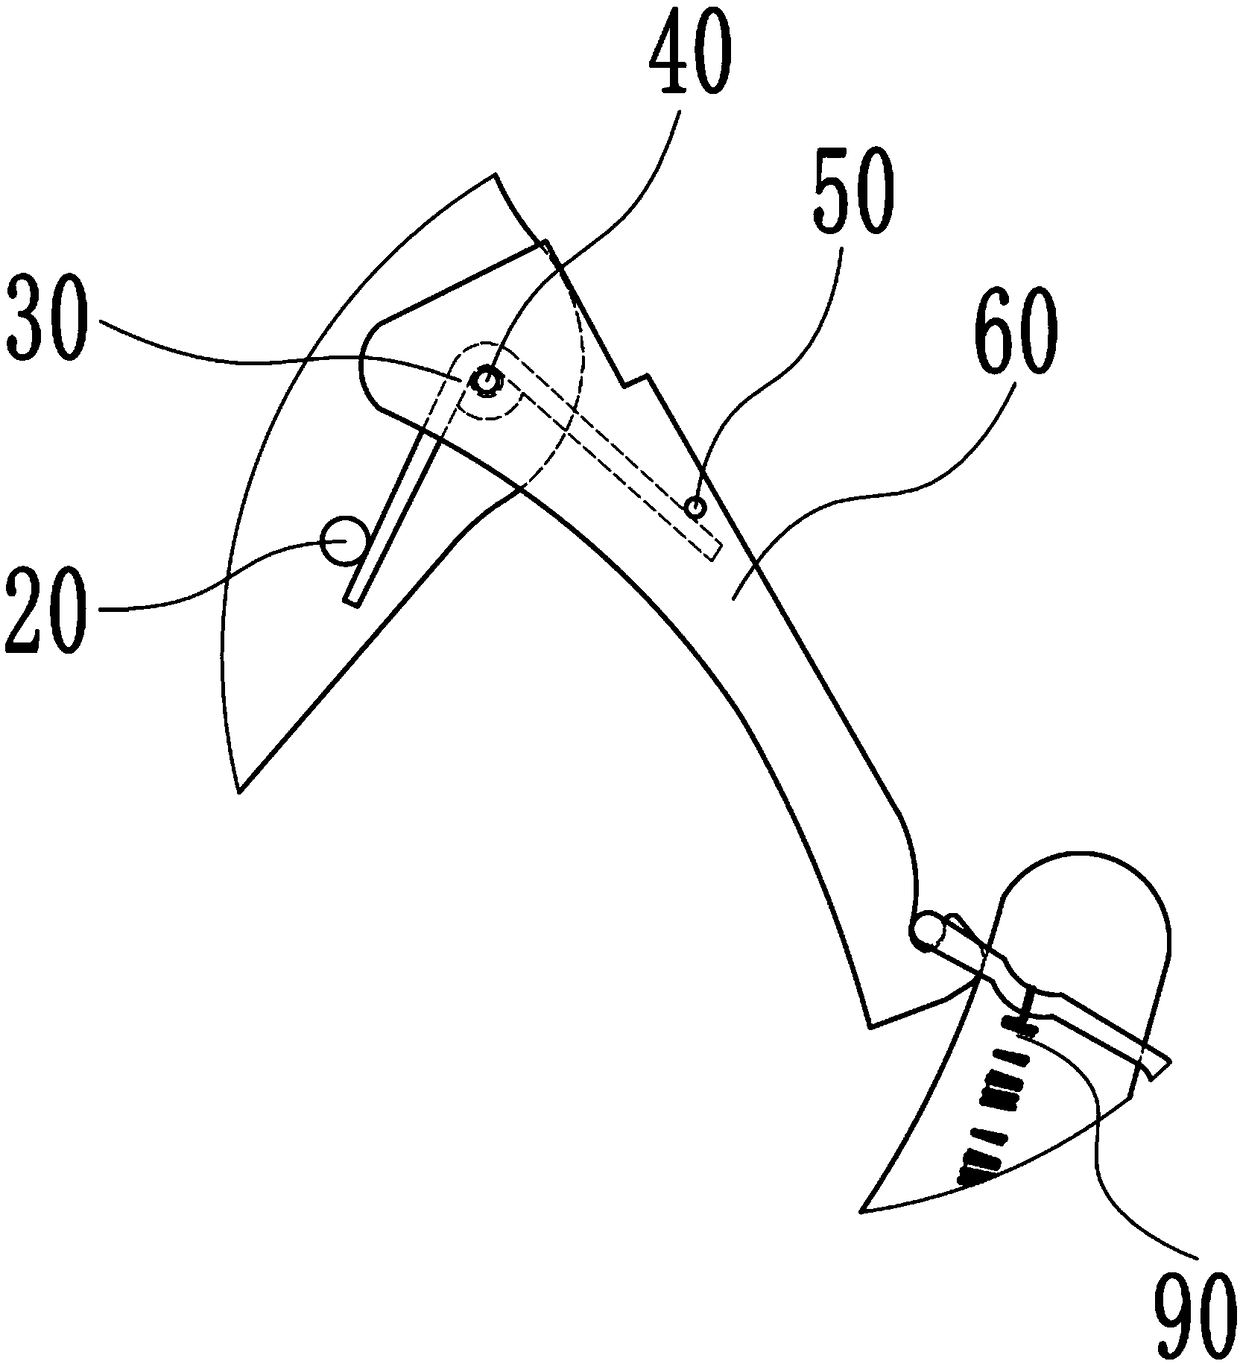 Hoisting device for construction equipment